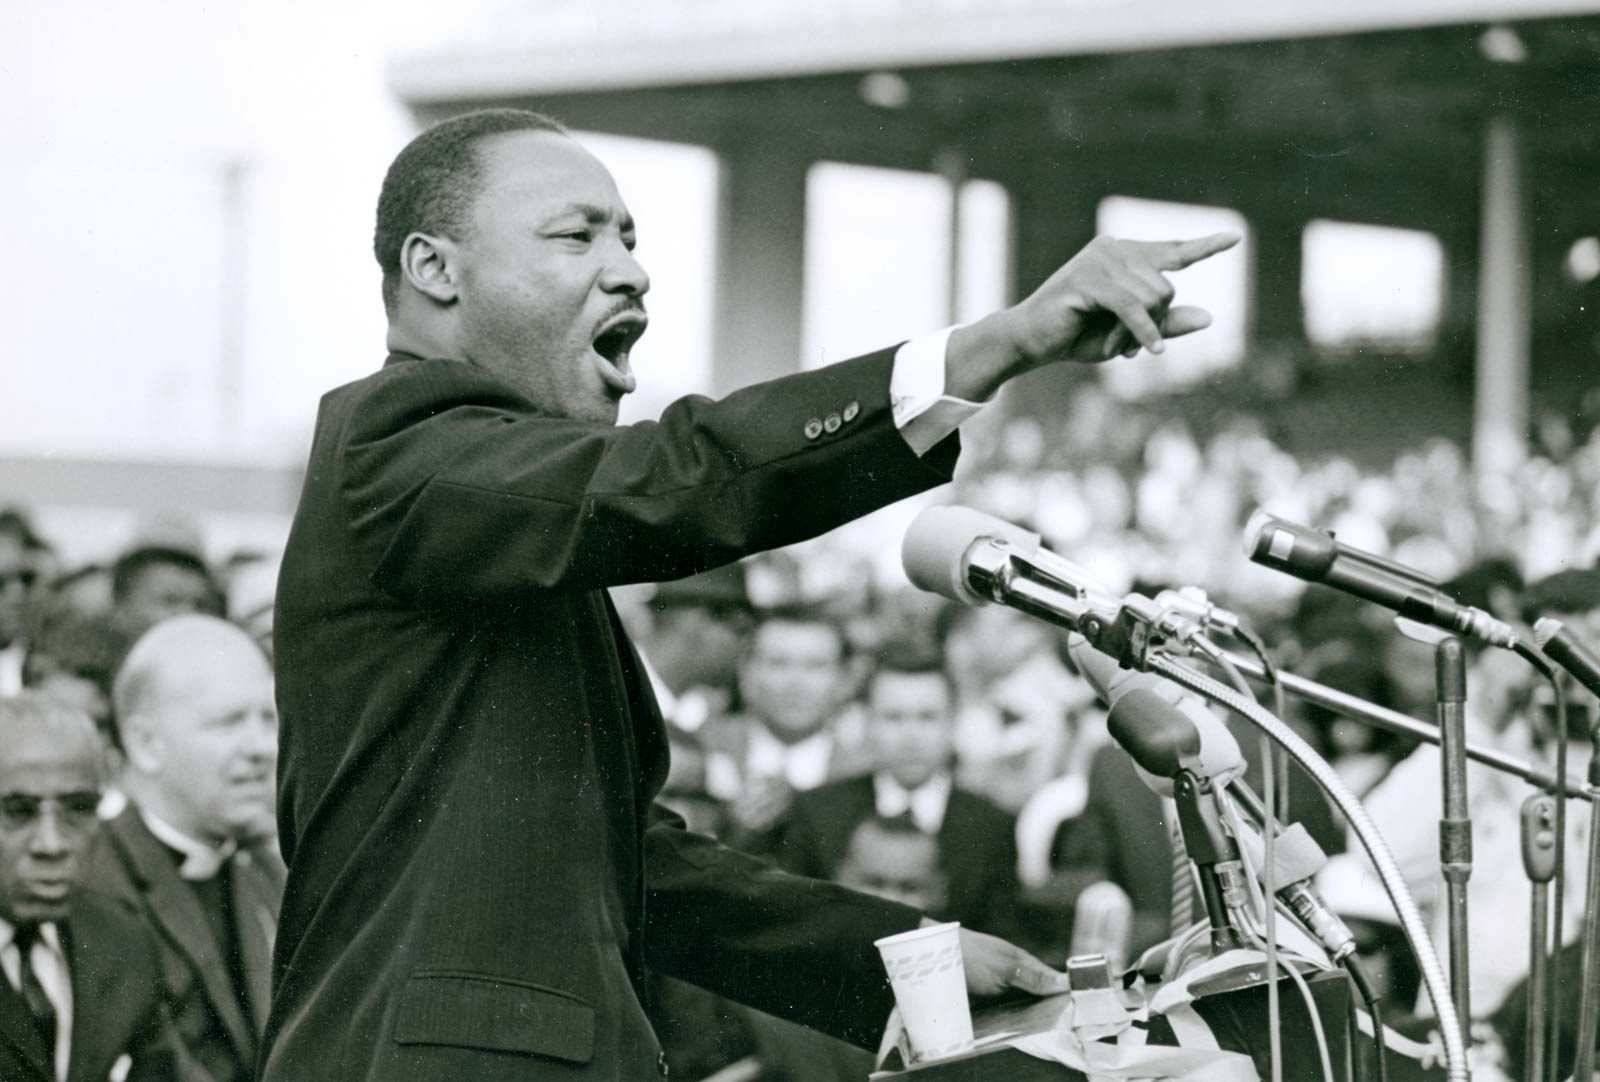 Martin Luther King, Jr. | Biography, Speeches, Facts, & Assassination